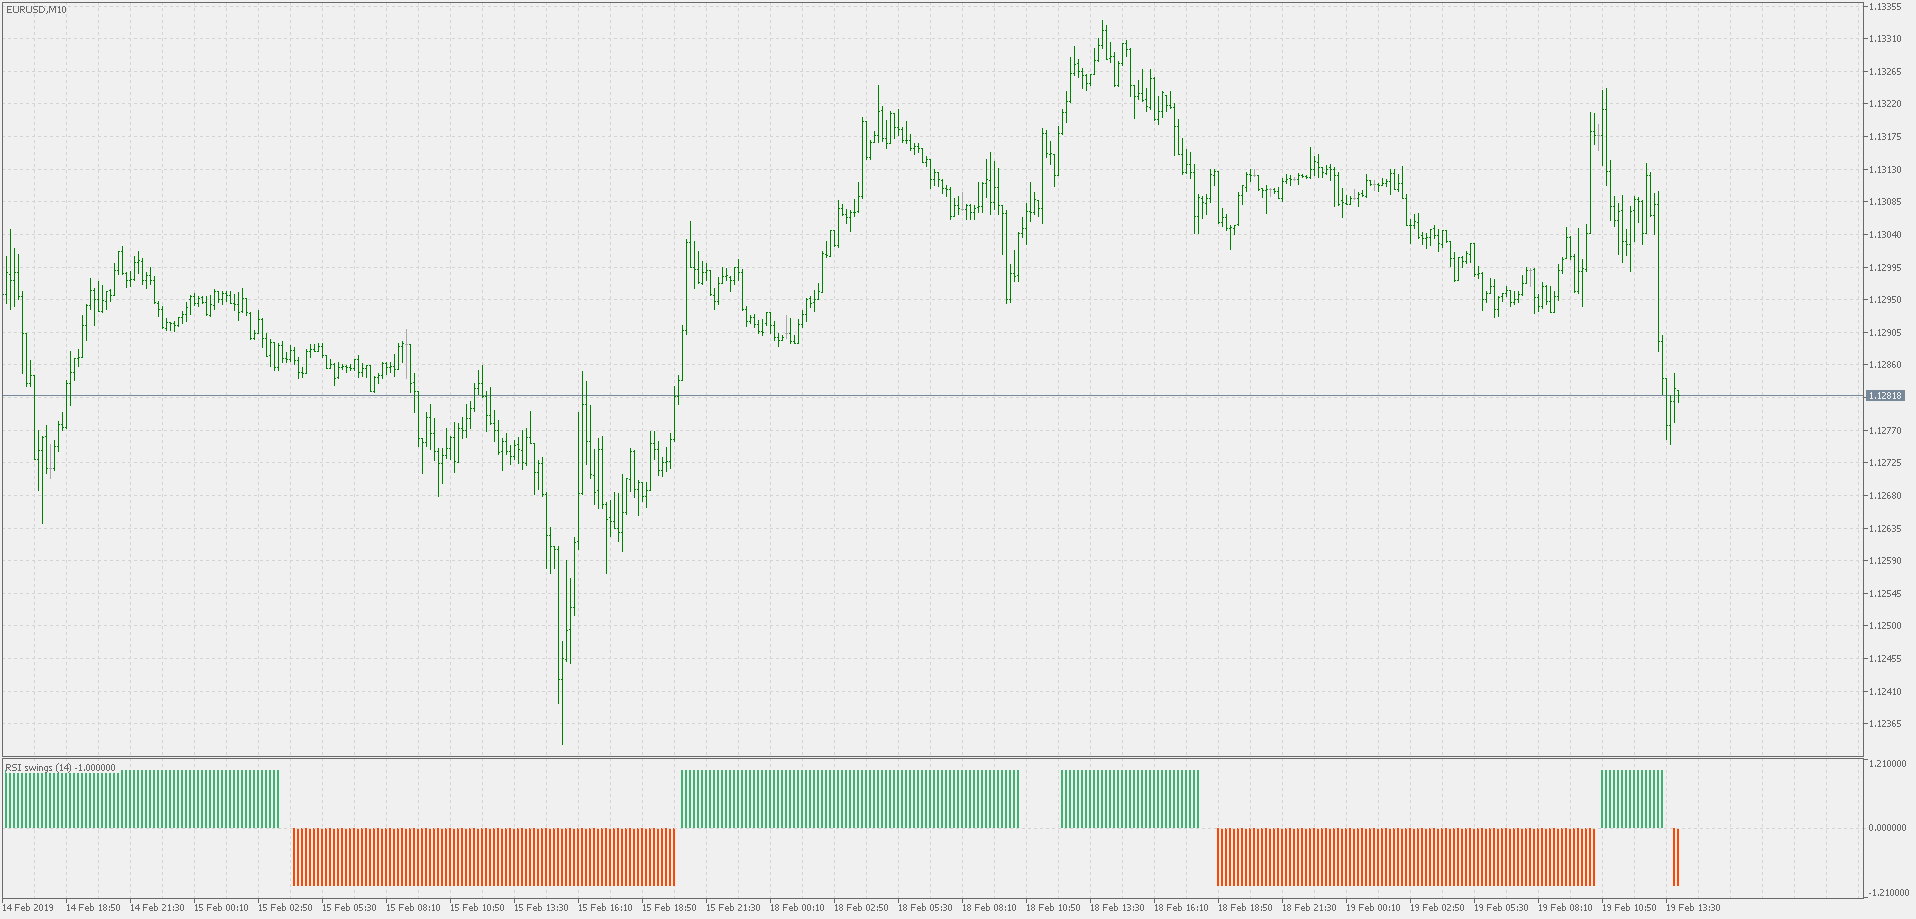 Free download of the 'RSI swings' indicator by 'mladen ...